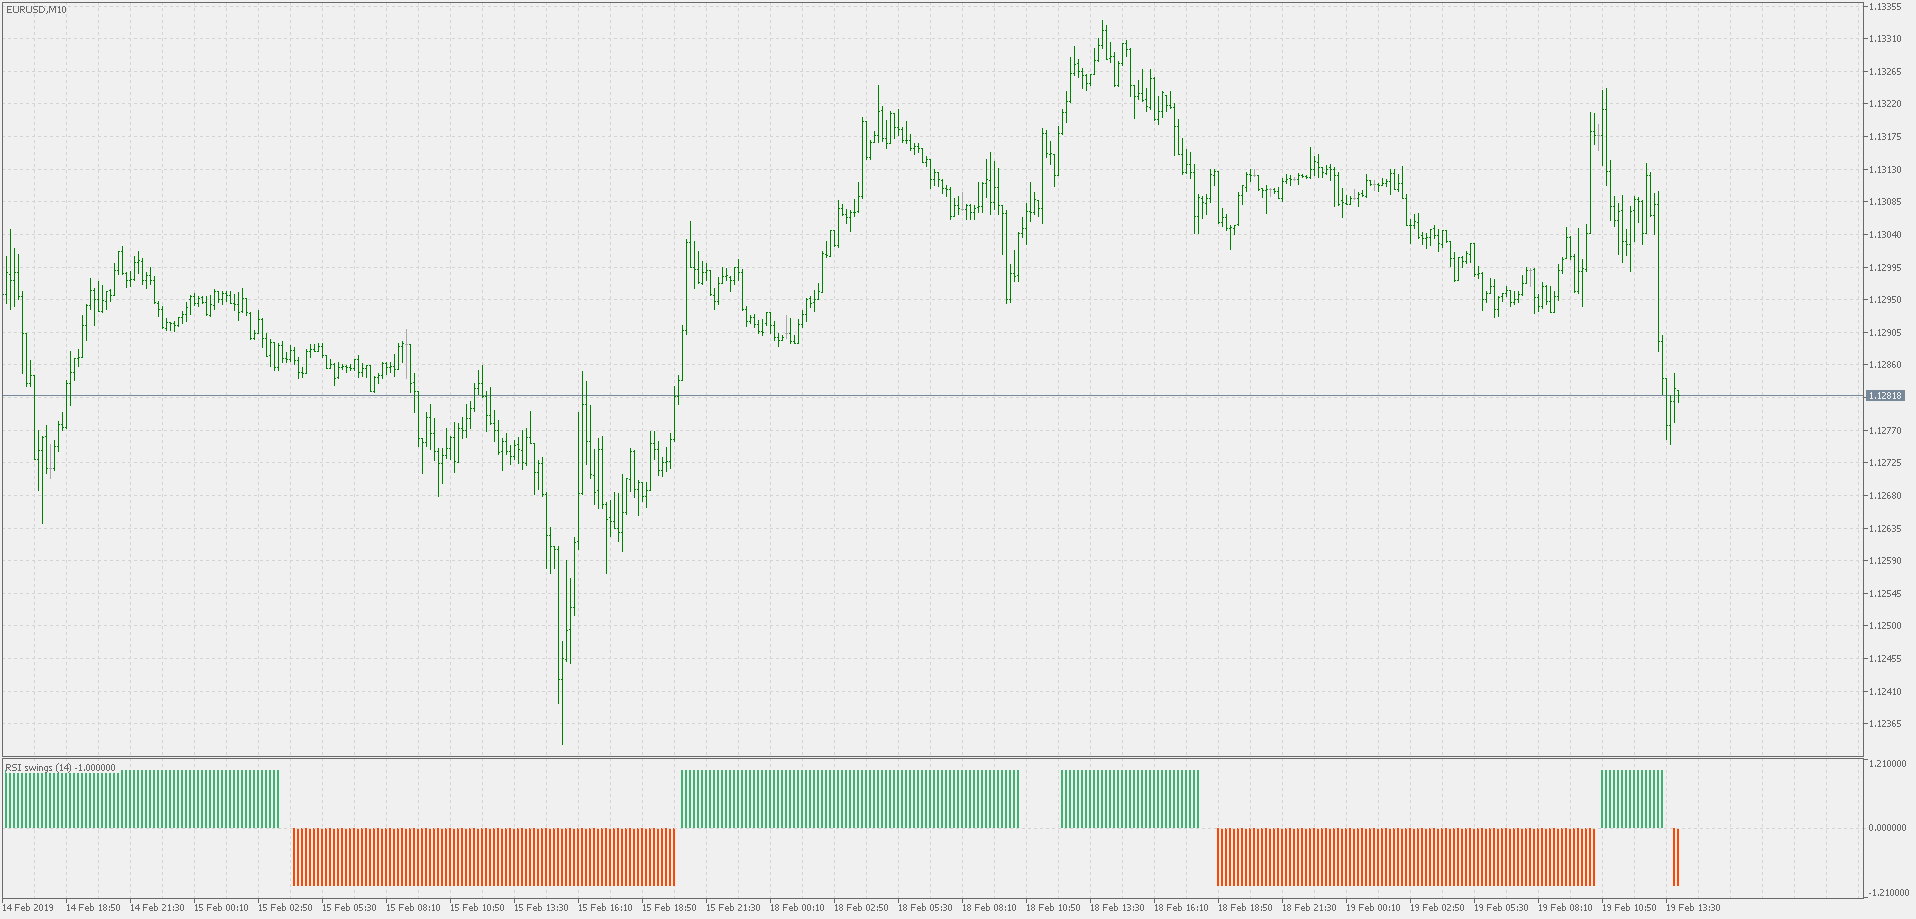 Free download of the 'RSI swings' indicator by 'mladen ...